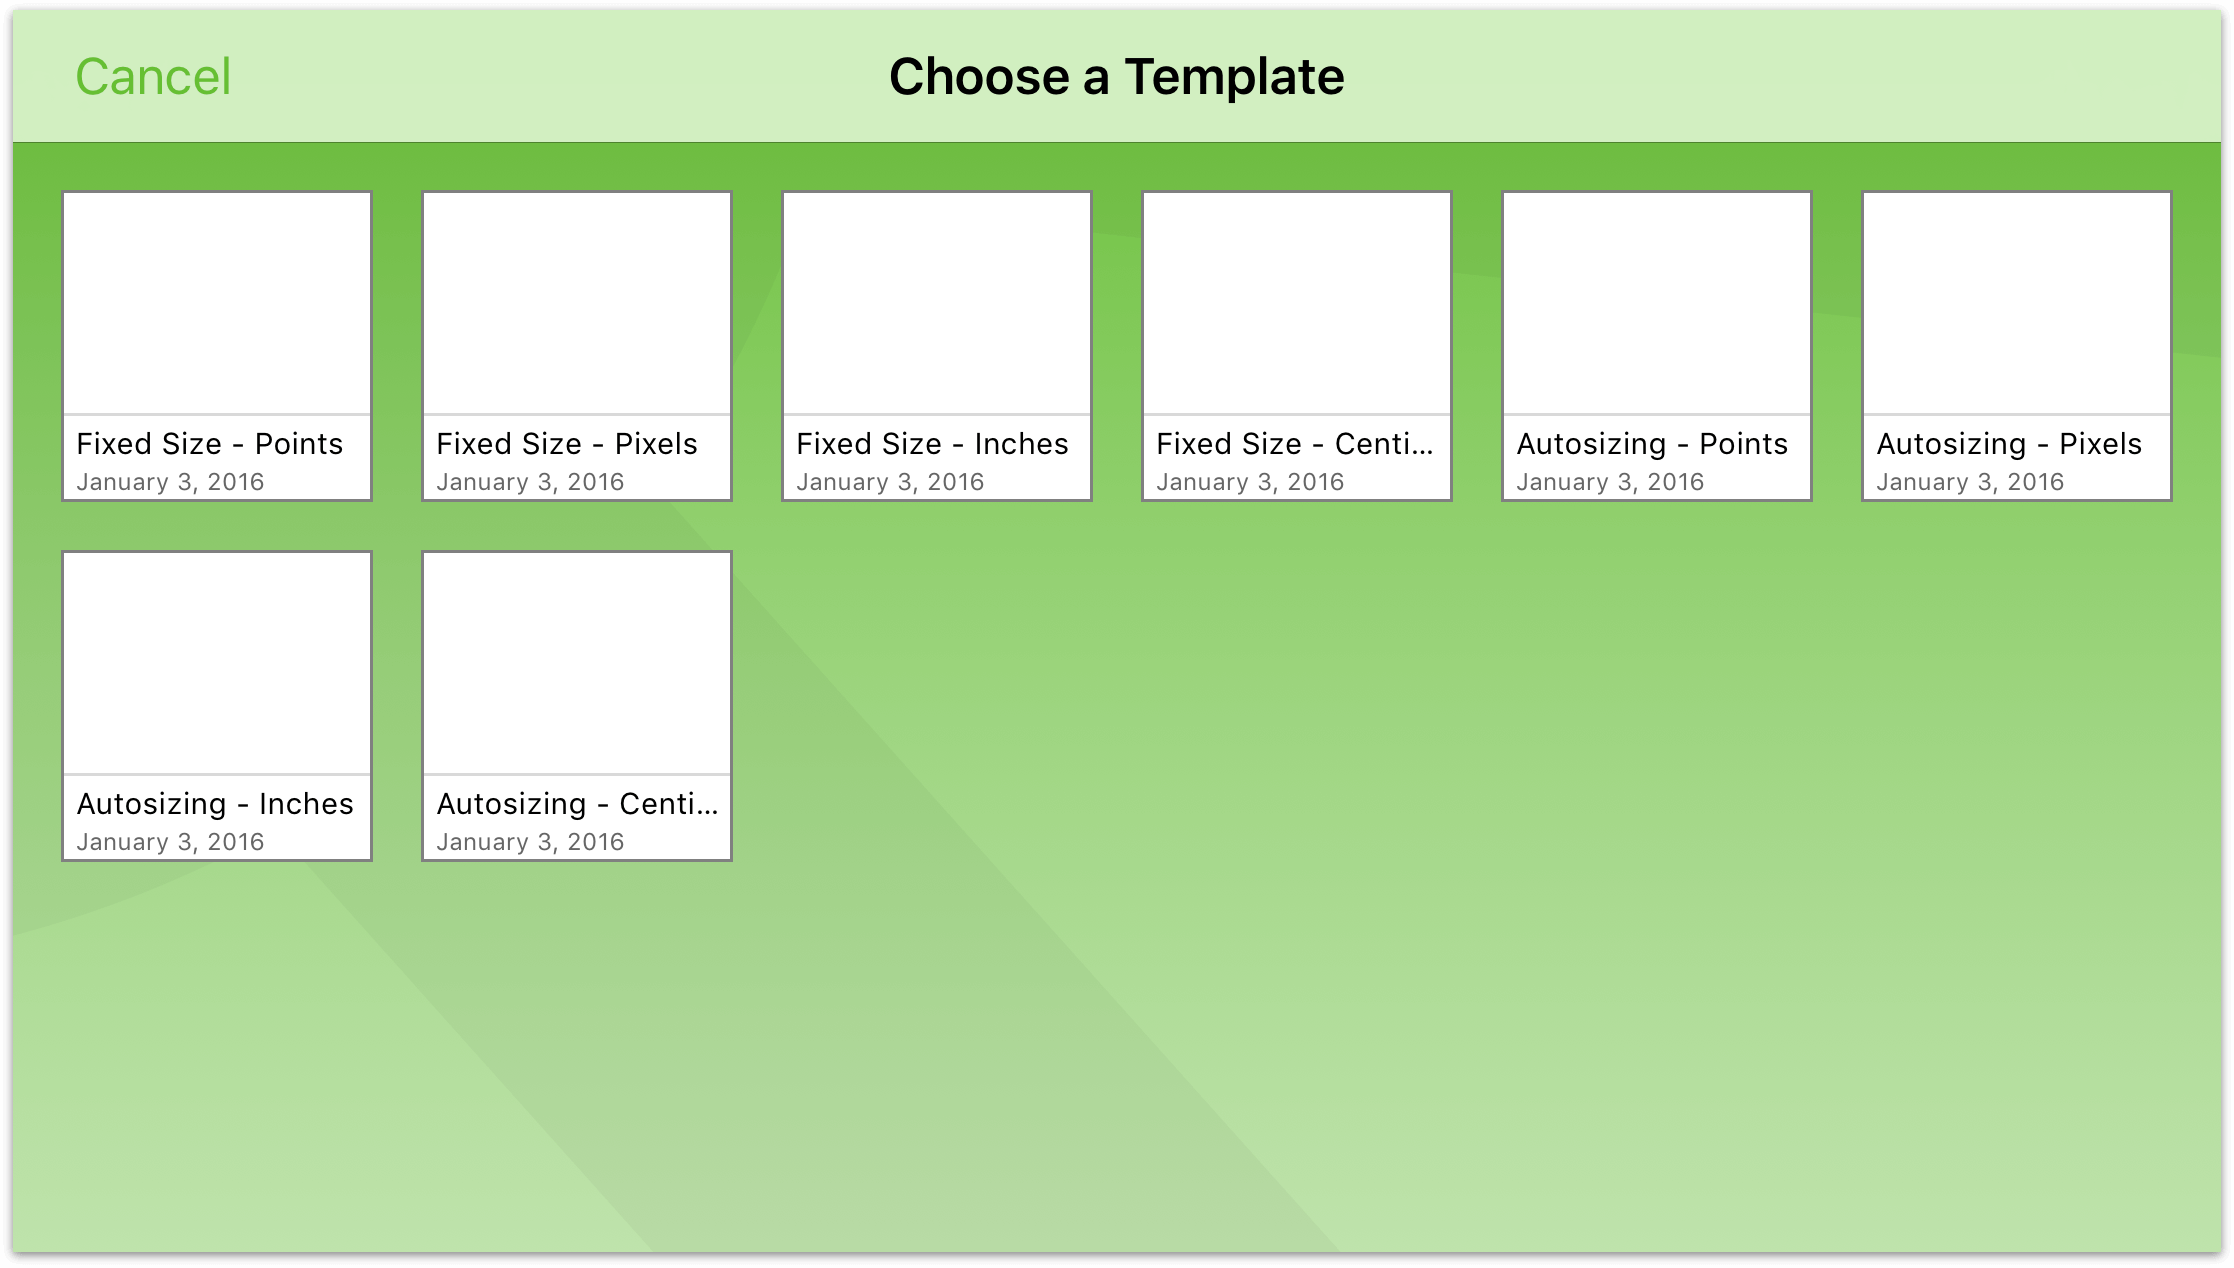 The Choose a Template screen